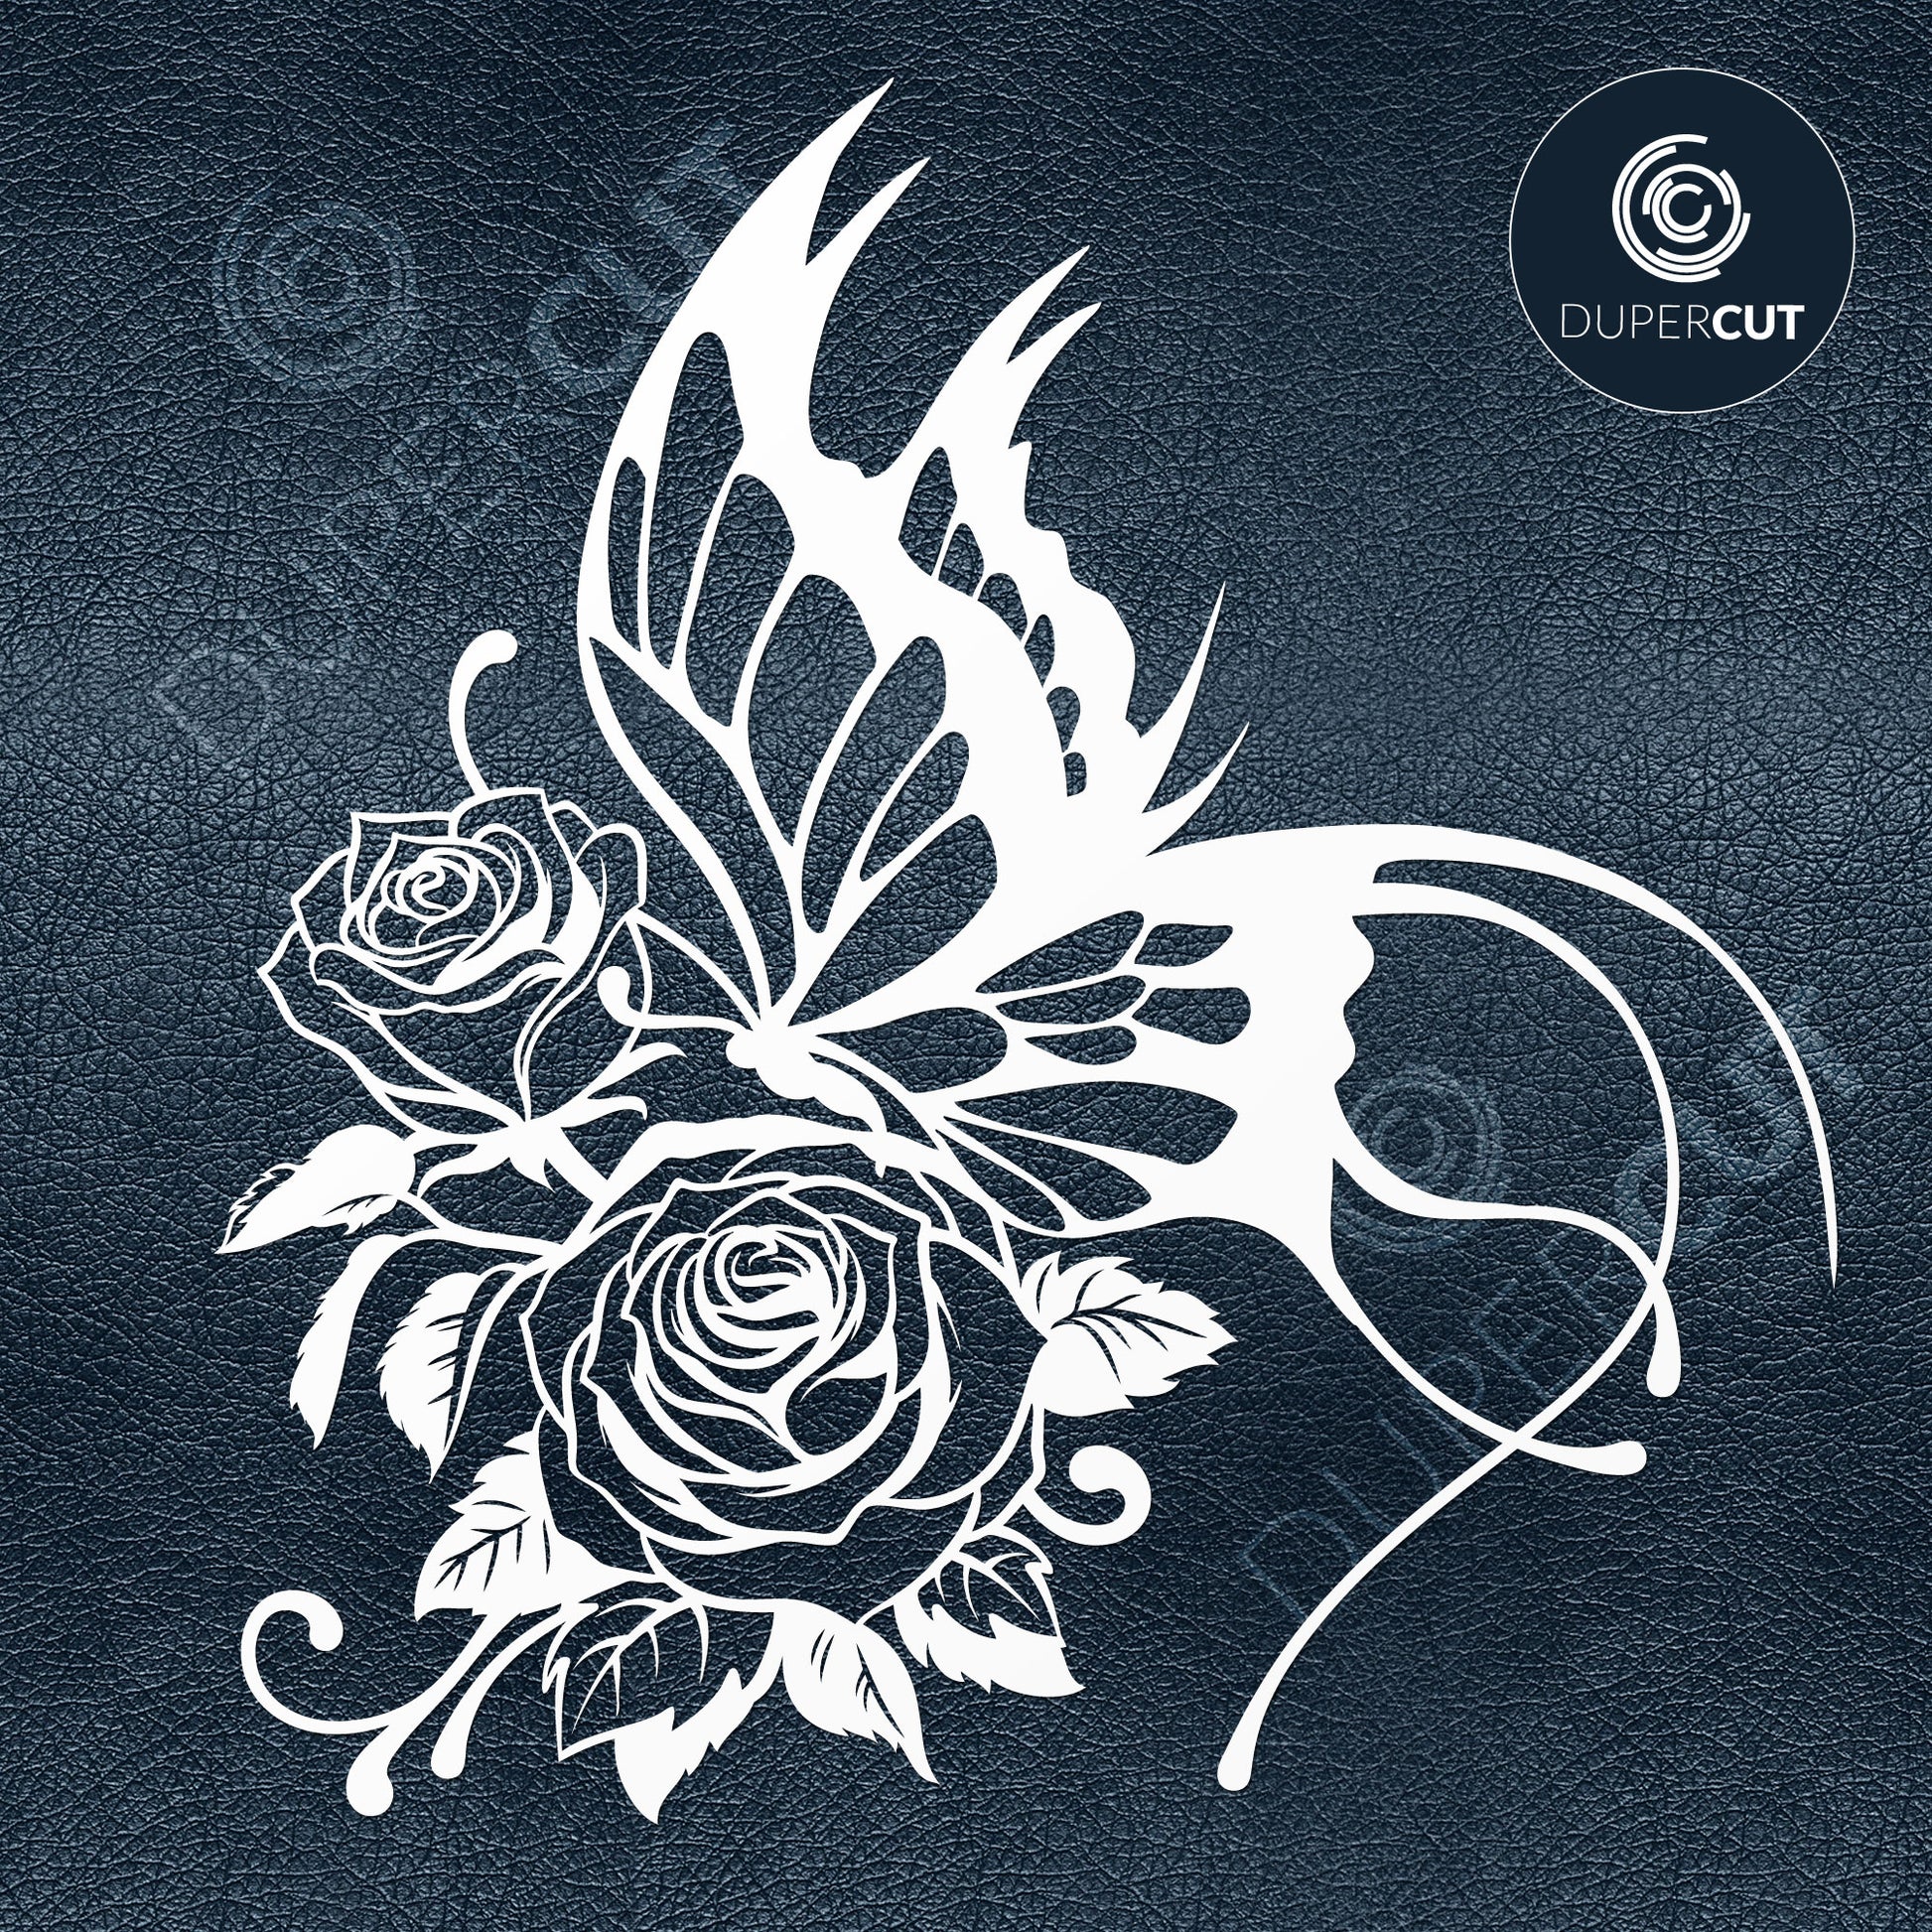 Beautiful buttefly sitting on roses line art - SVG DXF vector files for cutting and engraving by DuperCut.com